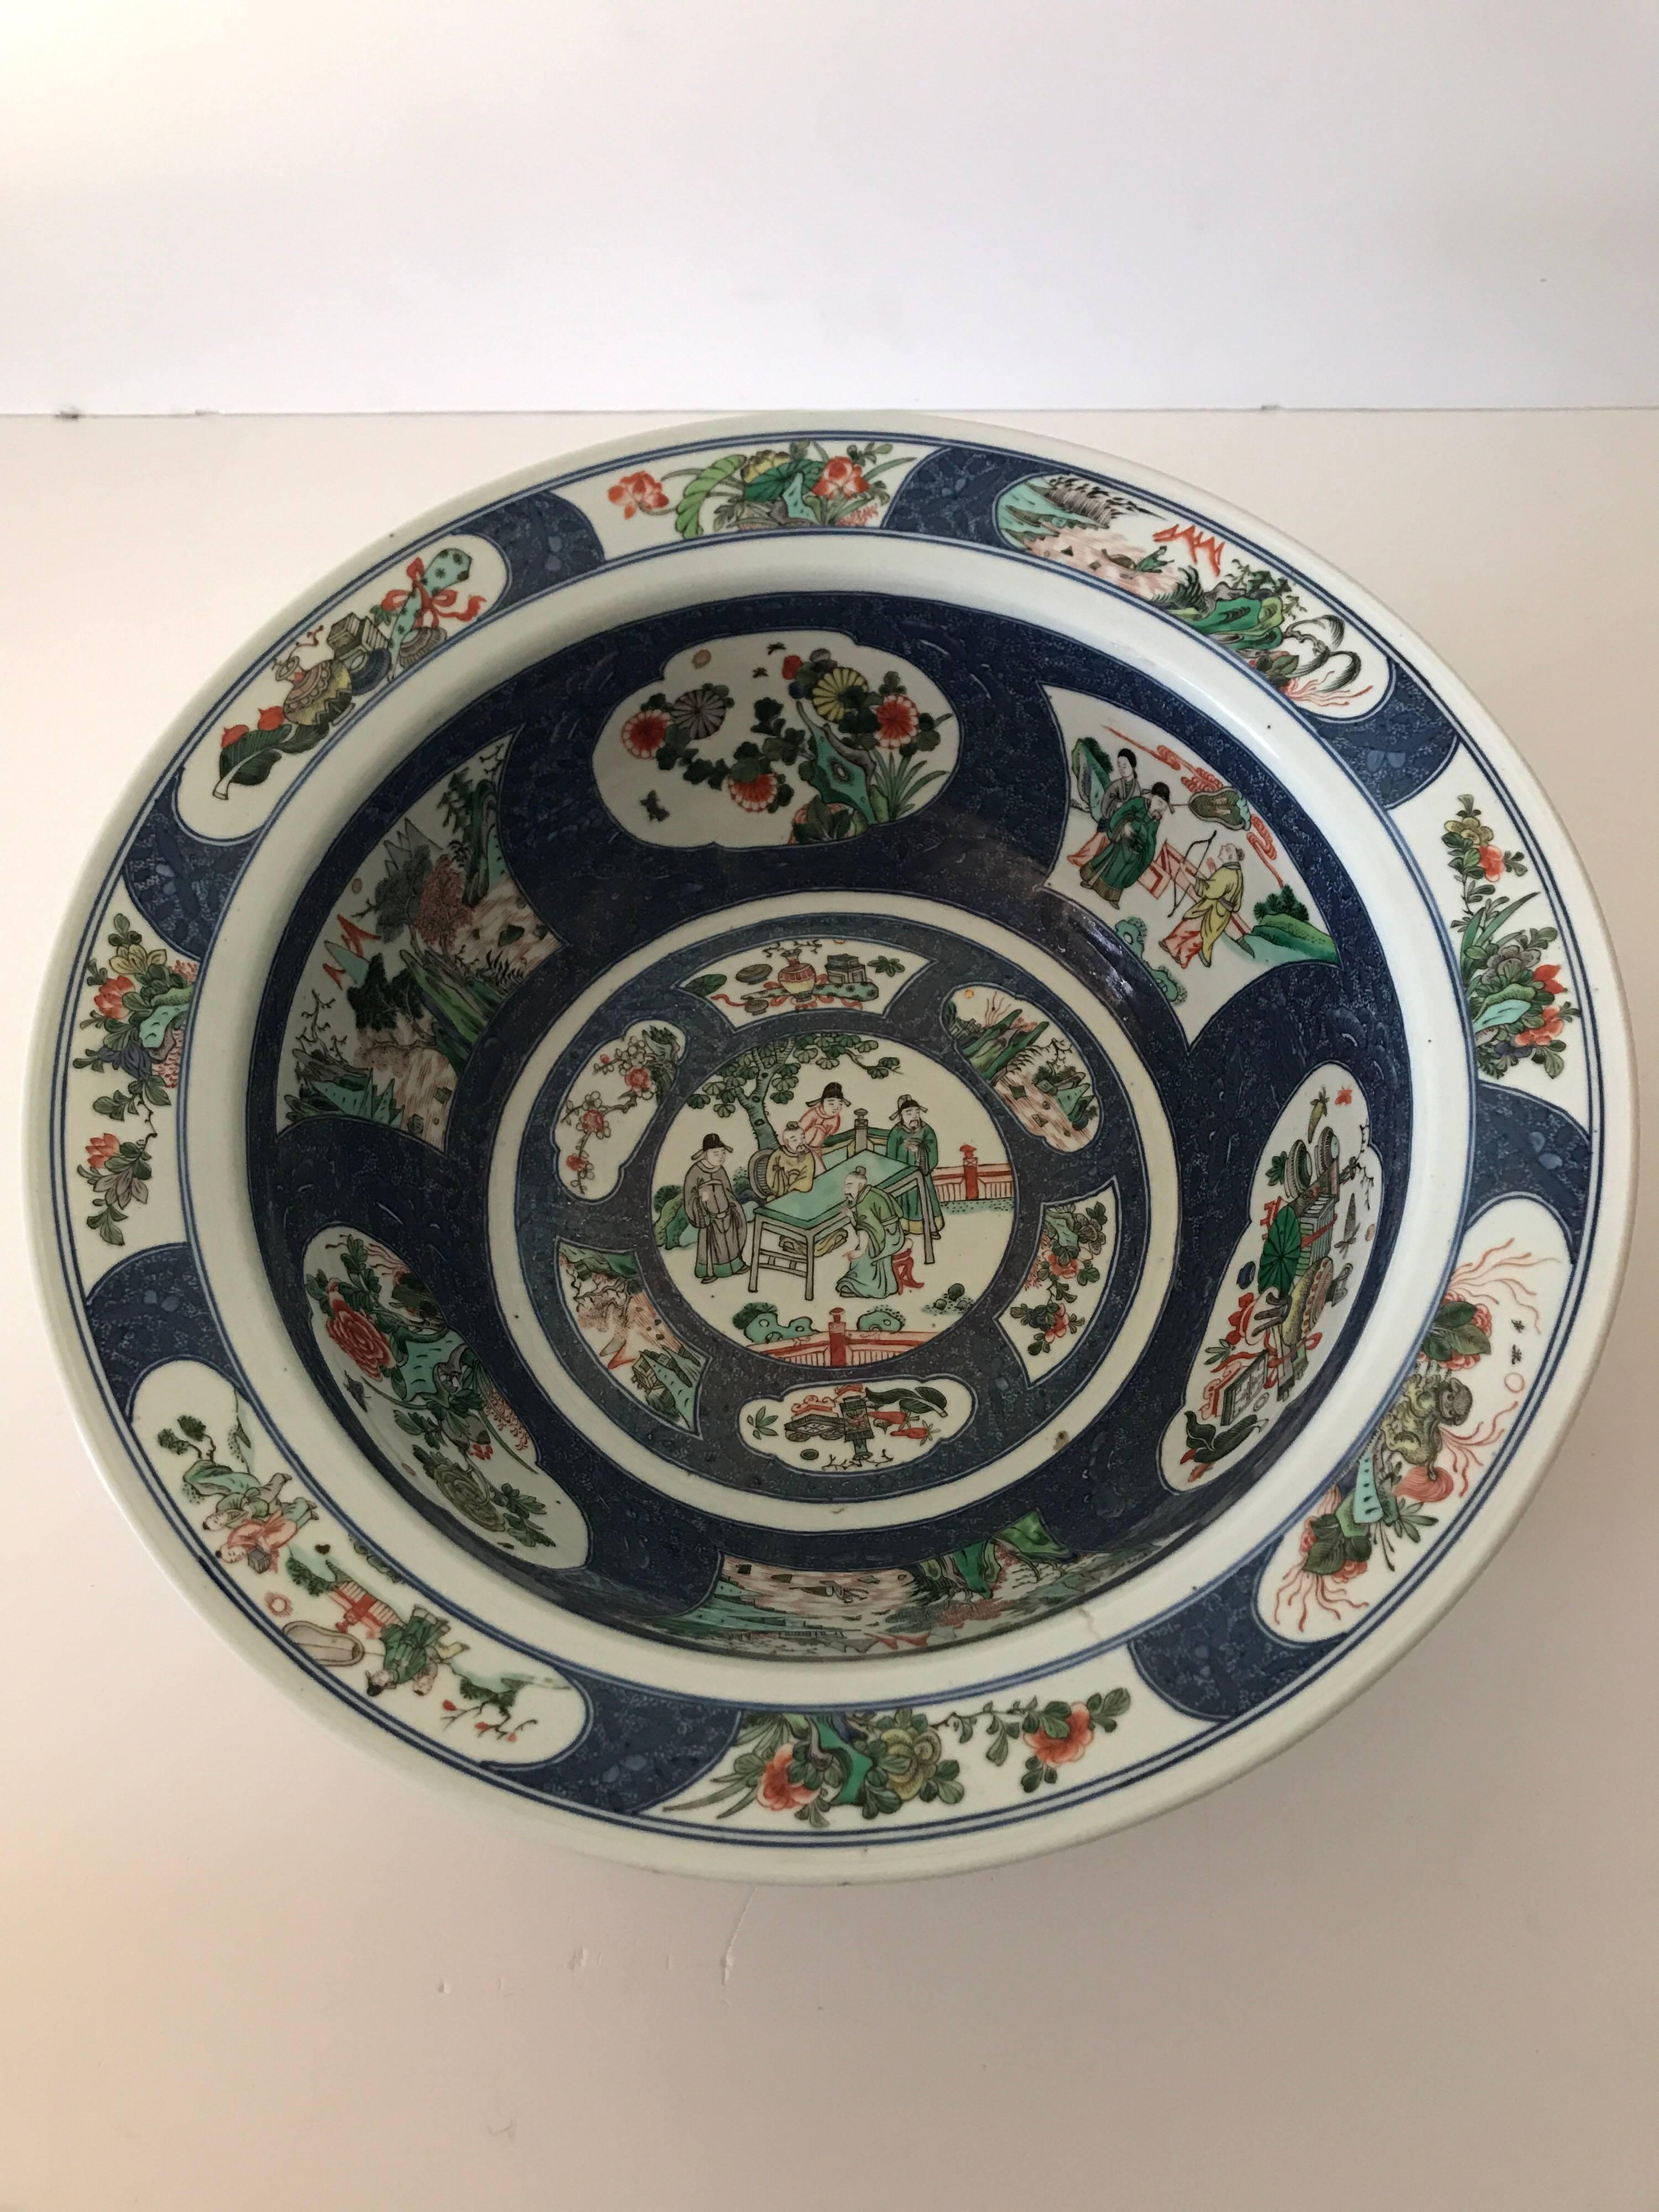 Very rare and large Chinese famille verte bowl, late 19th century.
A very rare bowl in famille verte depicting six cartousches on the inner side and eight cartousches on the rim all depicting traditional Chinese sceneries and figures. Peonies,